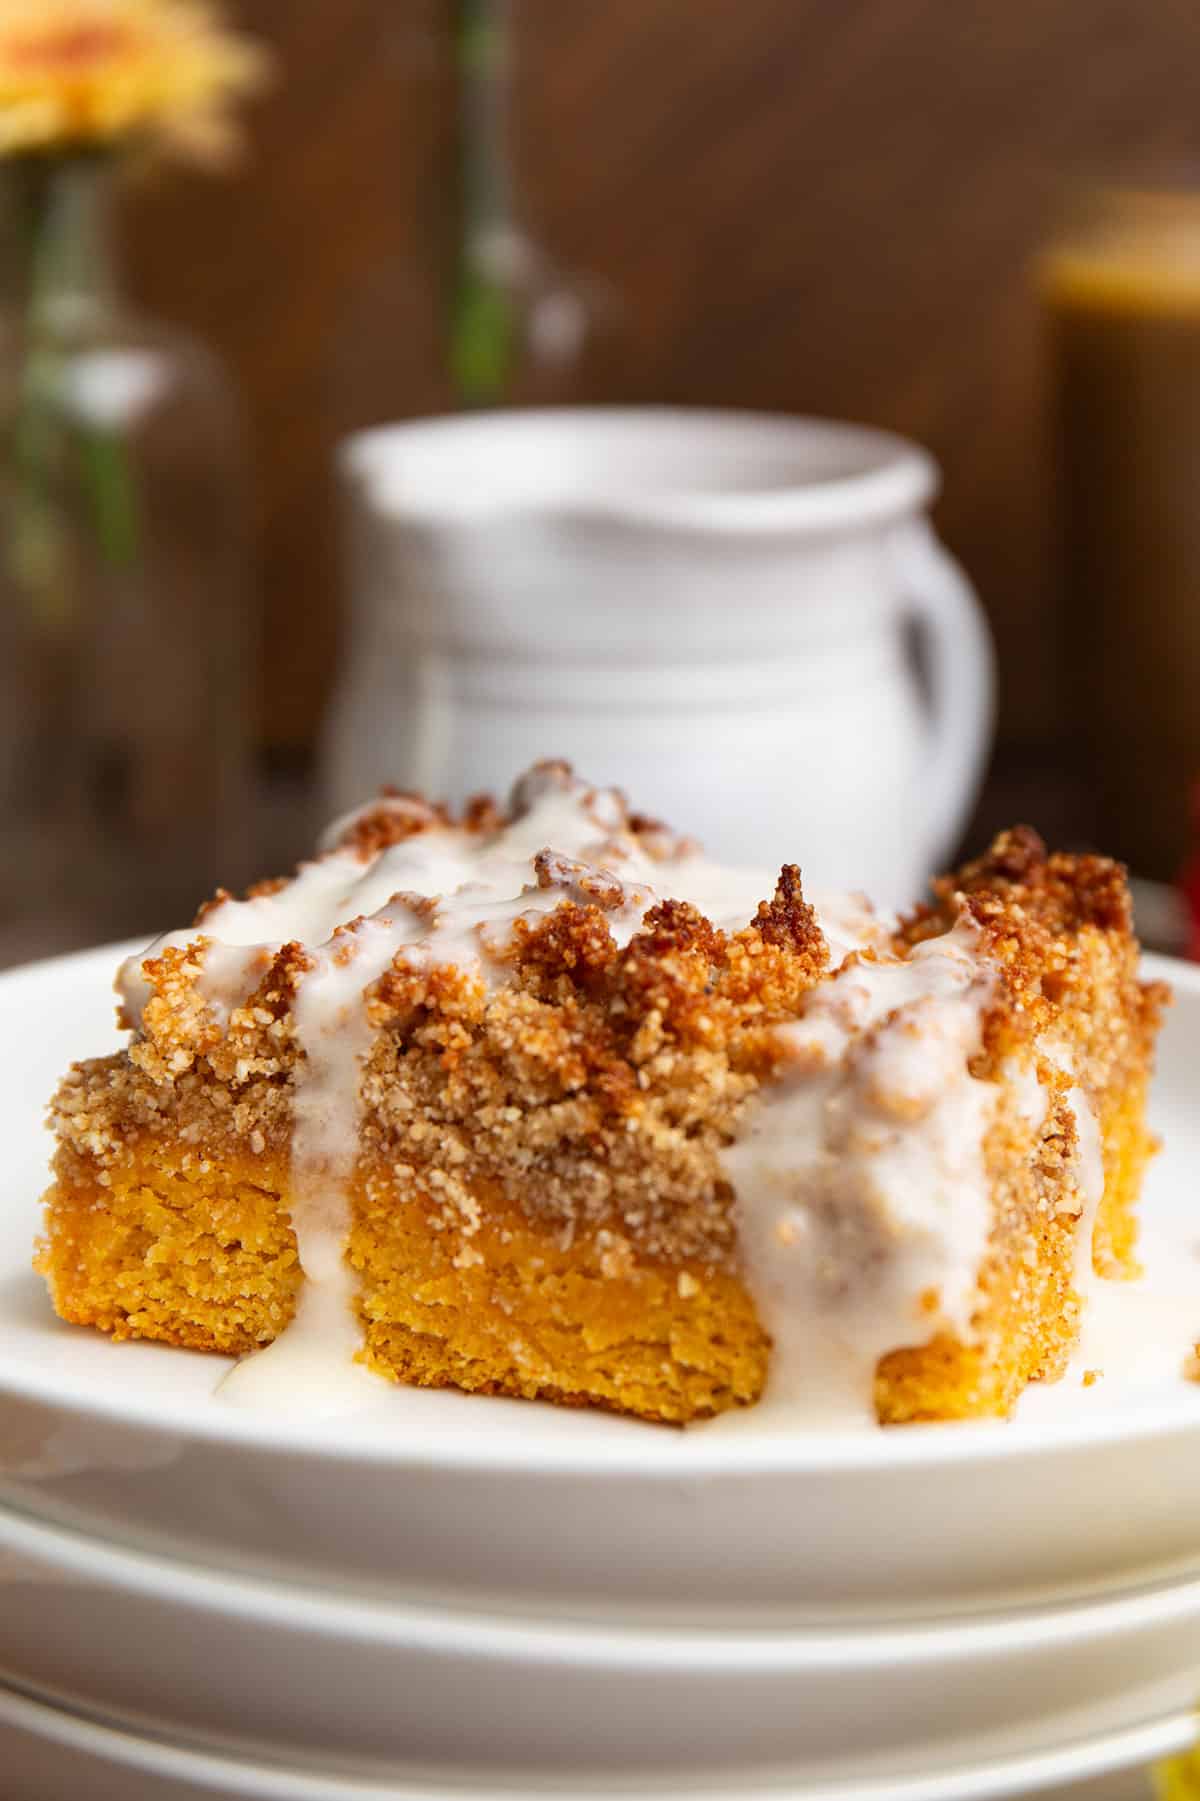 A slice of Keto Pumpkin Crumb Cake on a white plate with a white pitcher in behind.